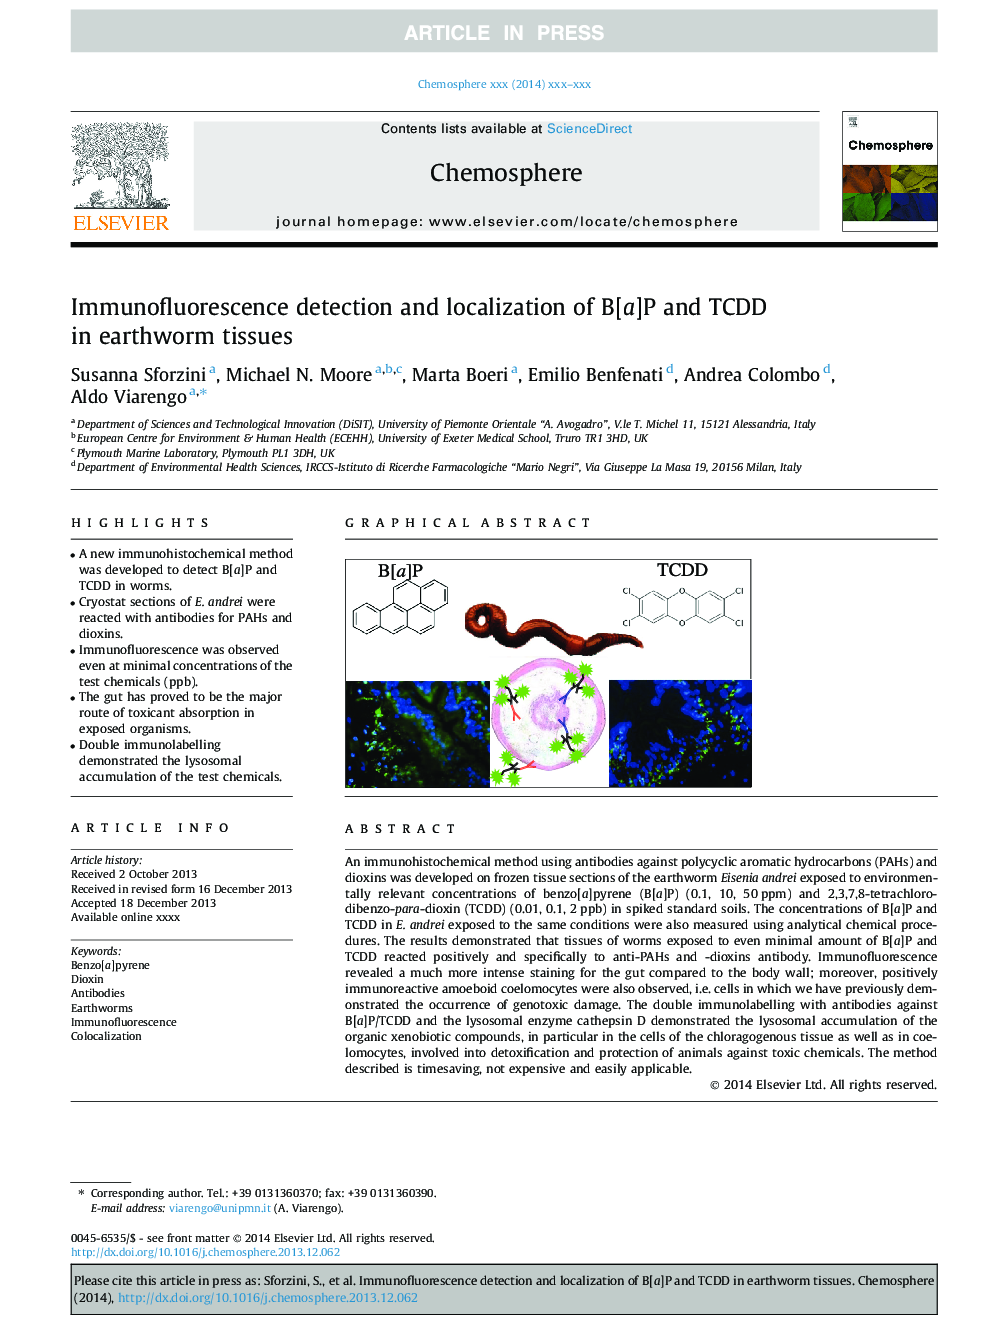 Immunofluorescence detection and localization of B[a]P and TCDD in earthworm tissues